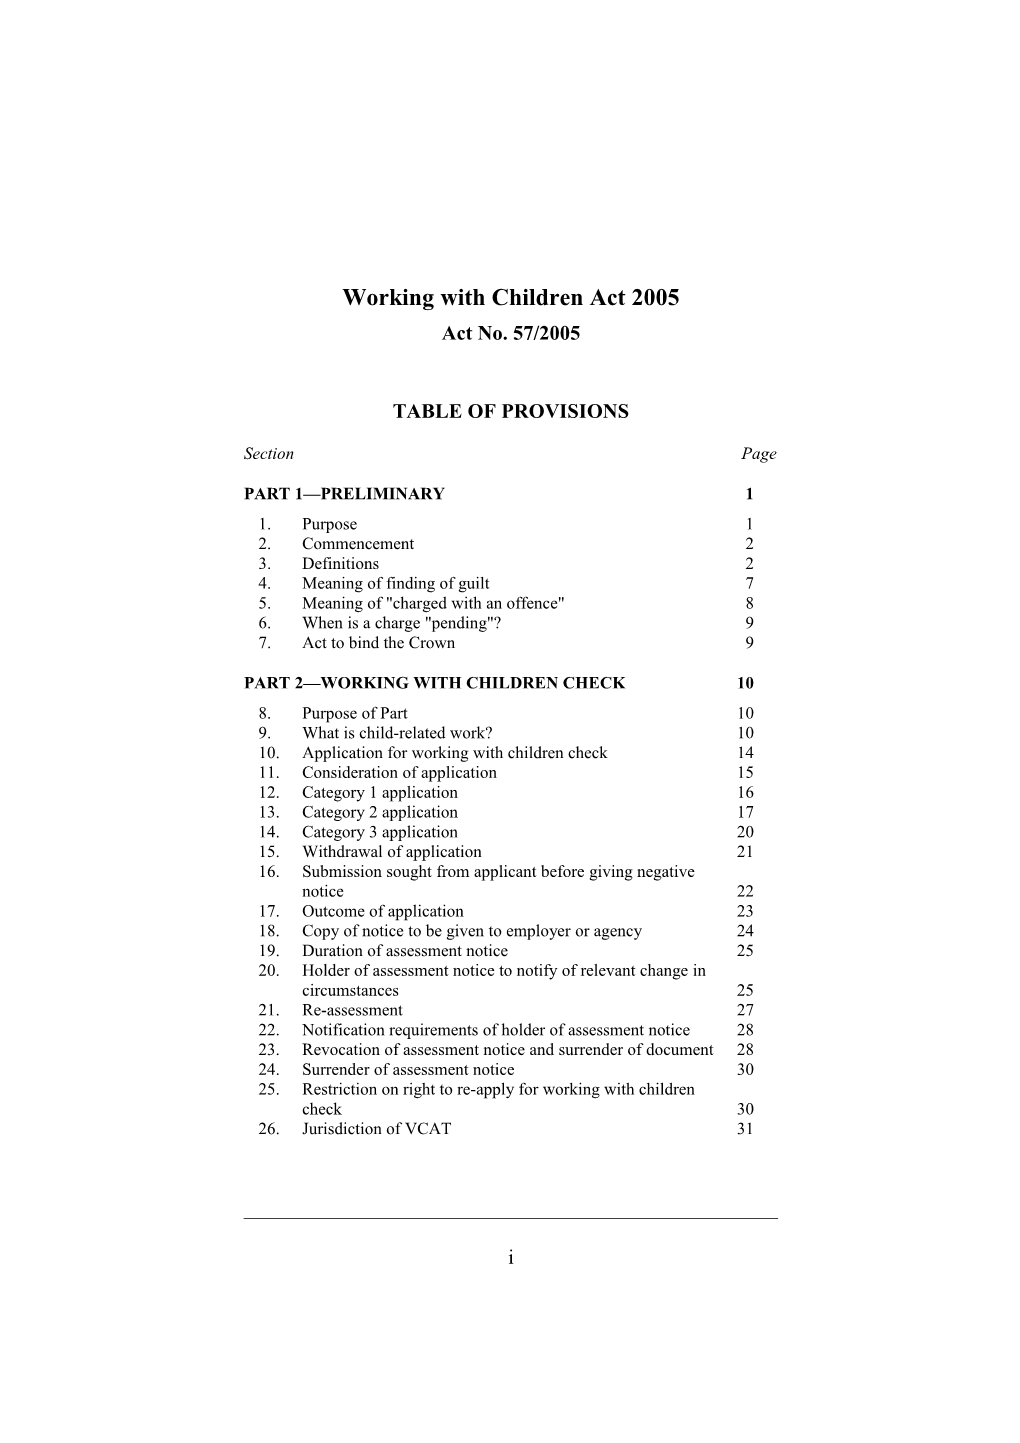 Working with Children Act 2005